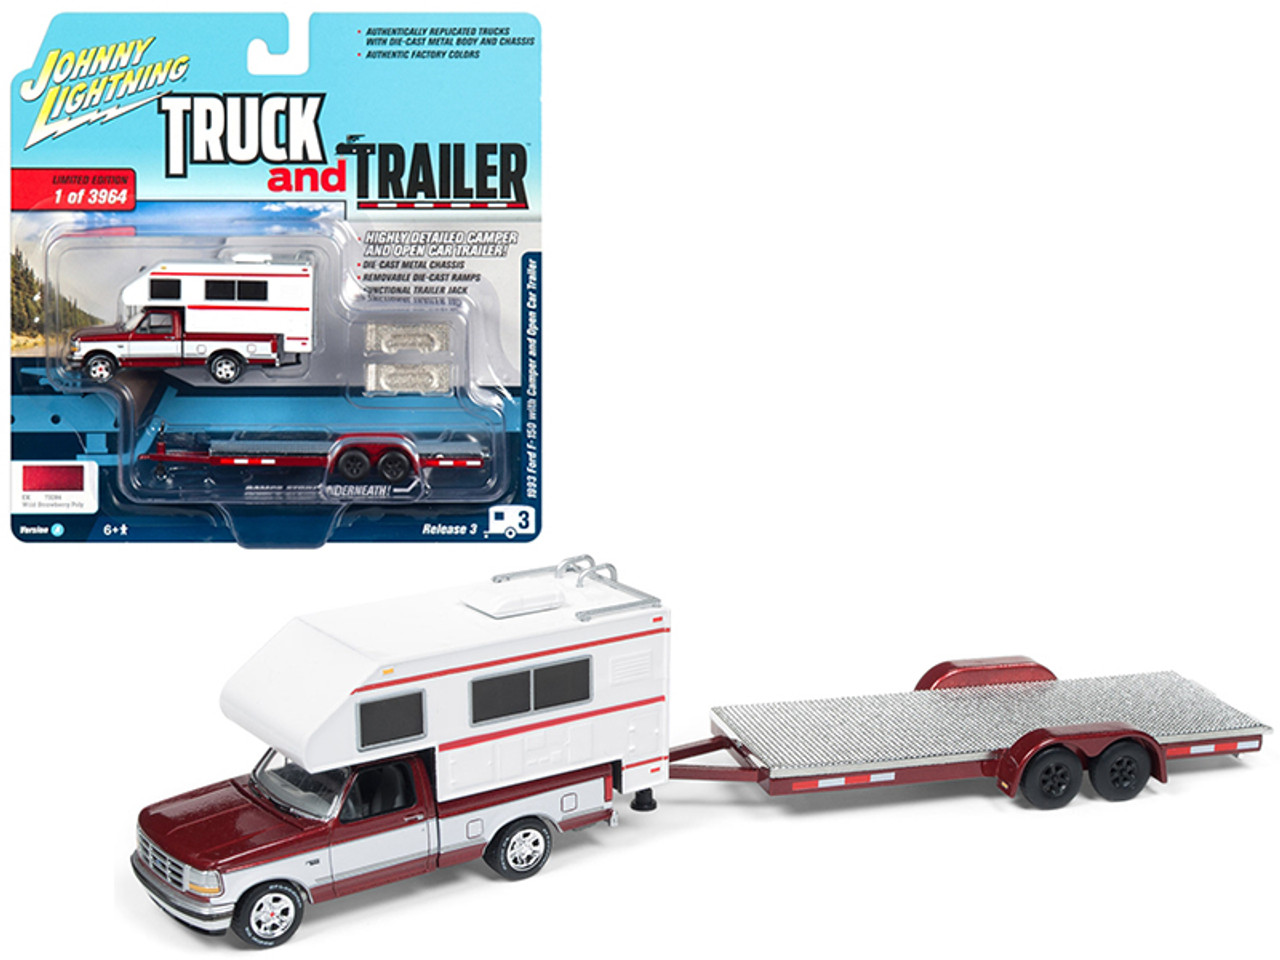 1993 Ford F-150 Red with White Camper and Chrome Open Car Trailer Limited Edition to 3,964 pieces Worldwide "Truck and Trailer" Series 3 1/64 Diecast Model Car by Johnny Lightning